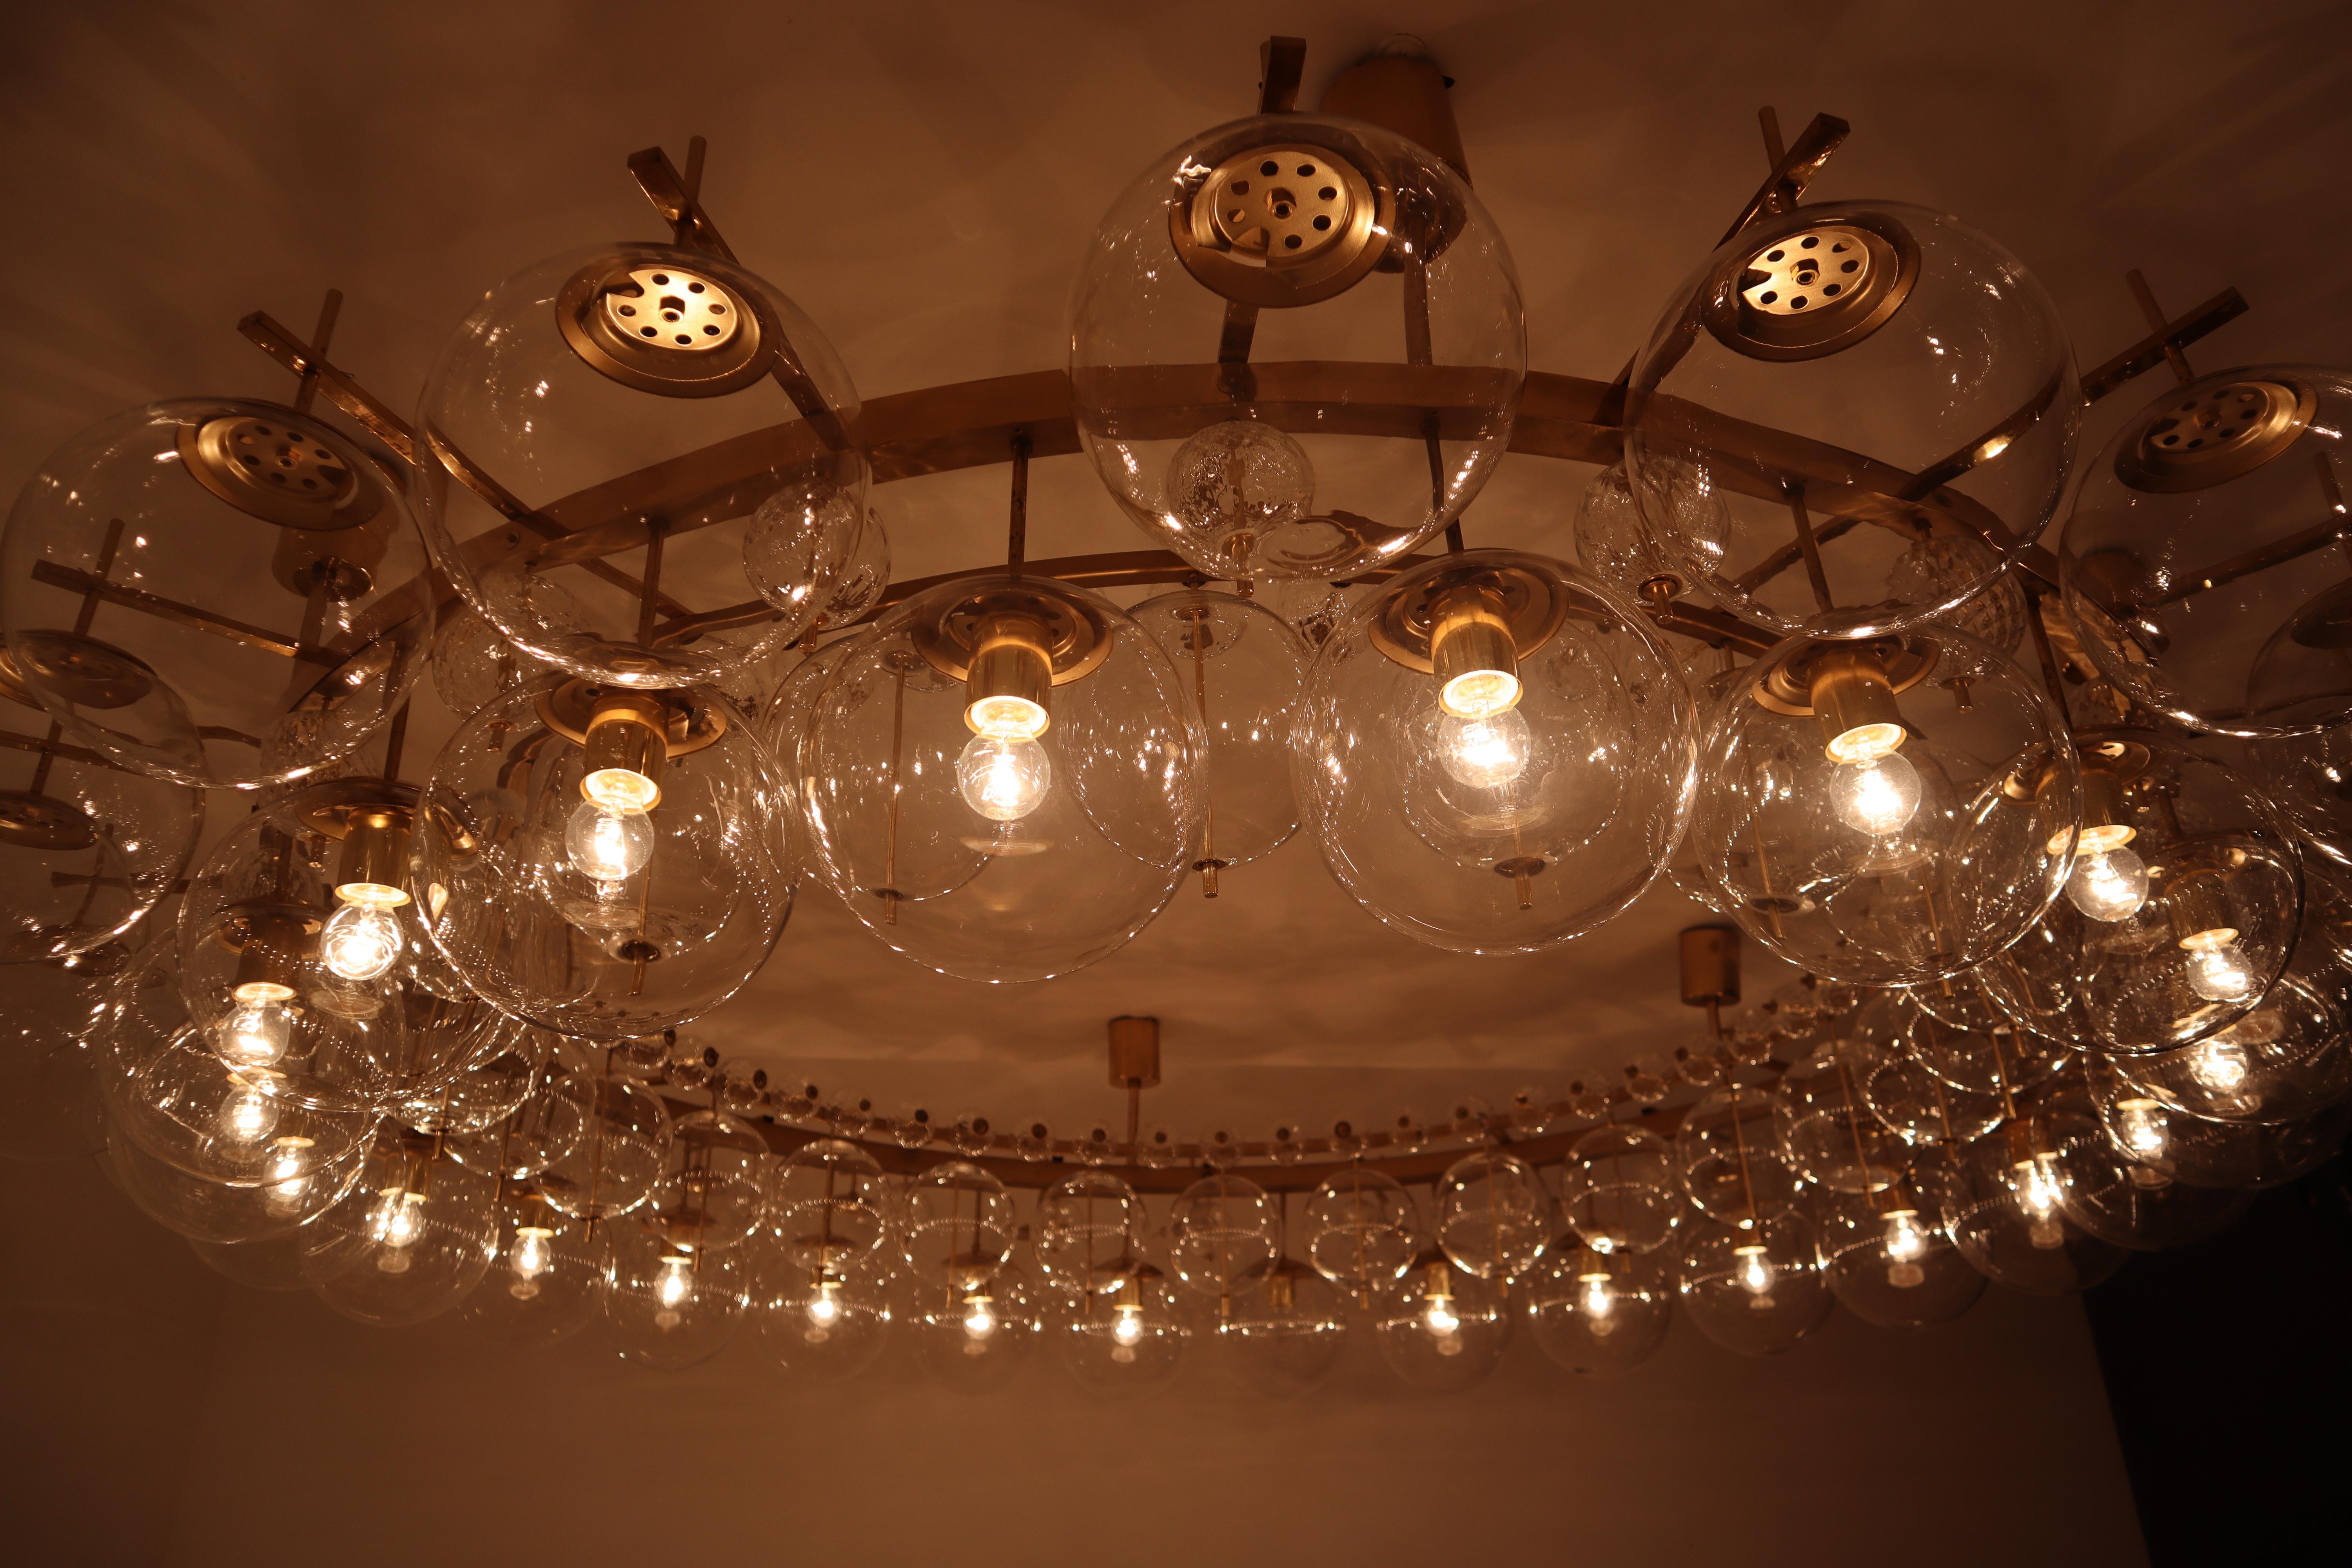 Two Extremely Large Hotel Chandeliers with Brass Fixture and Hand-Blowed Glass 3